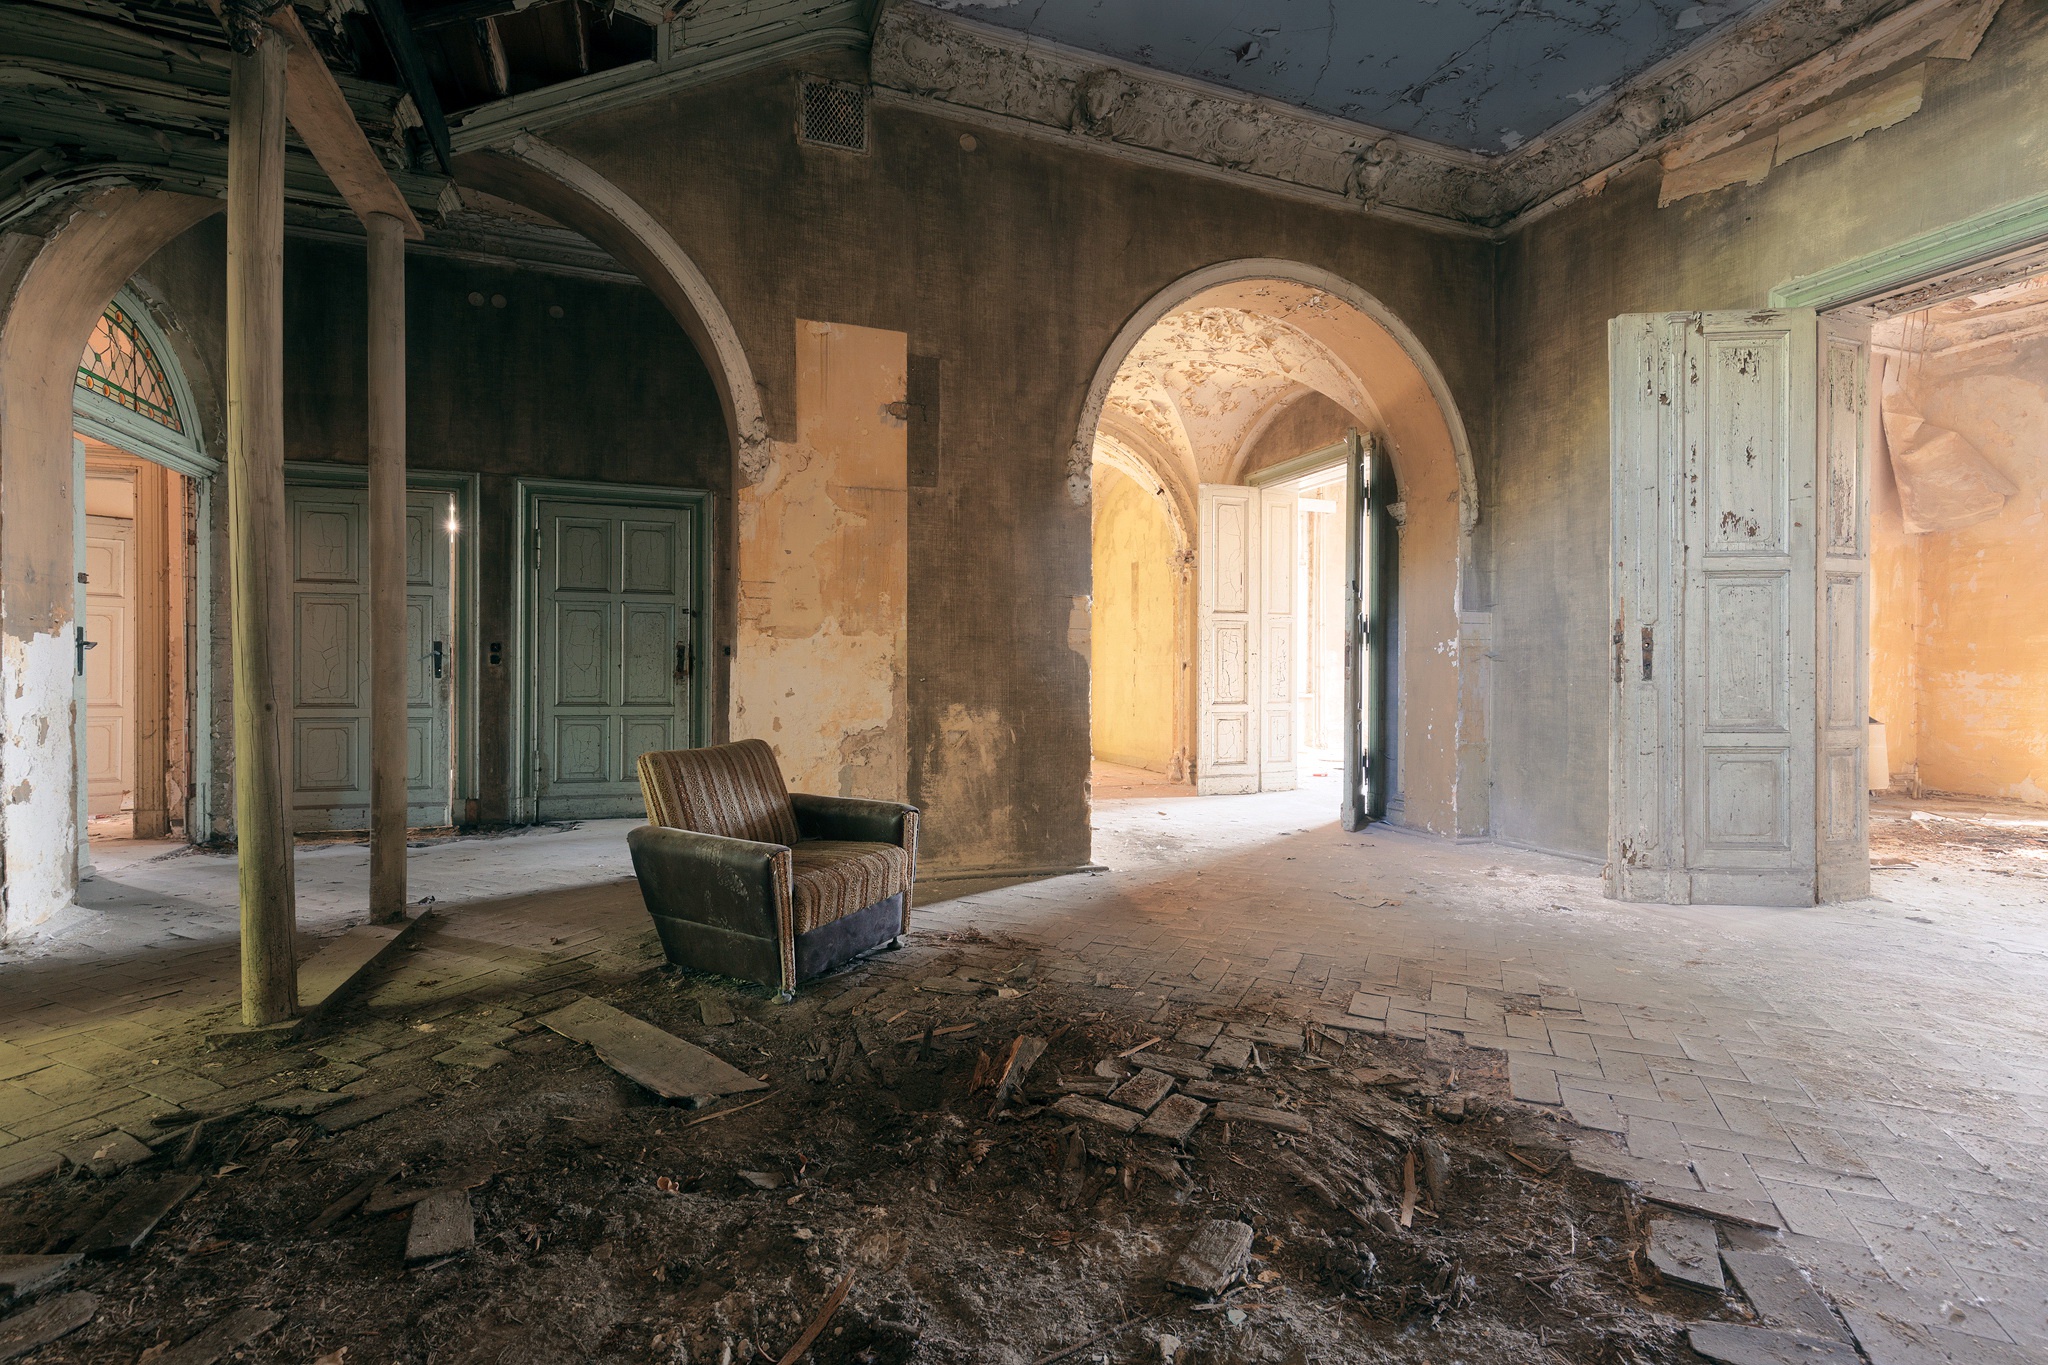 General 2048x1365 ruins old building room indoors abandoned